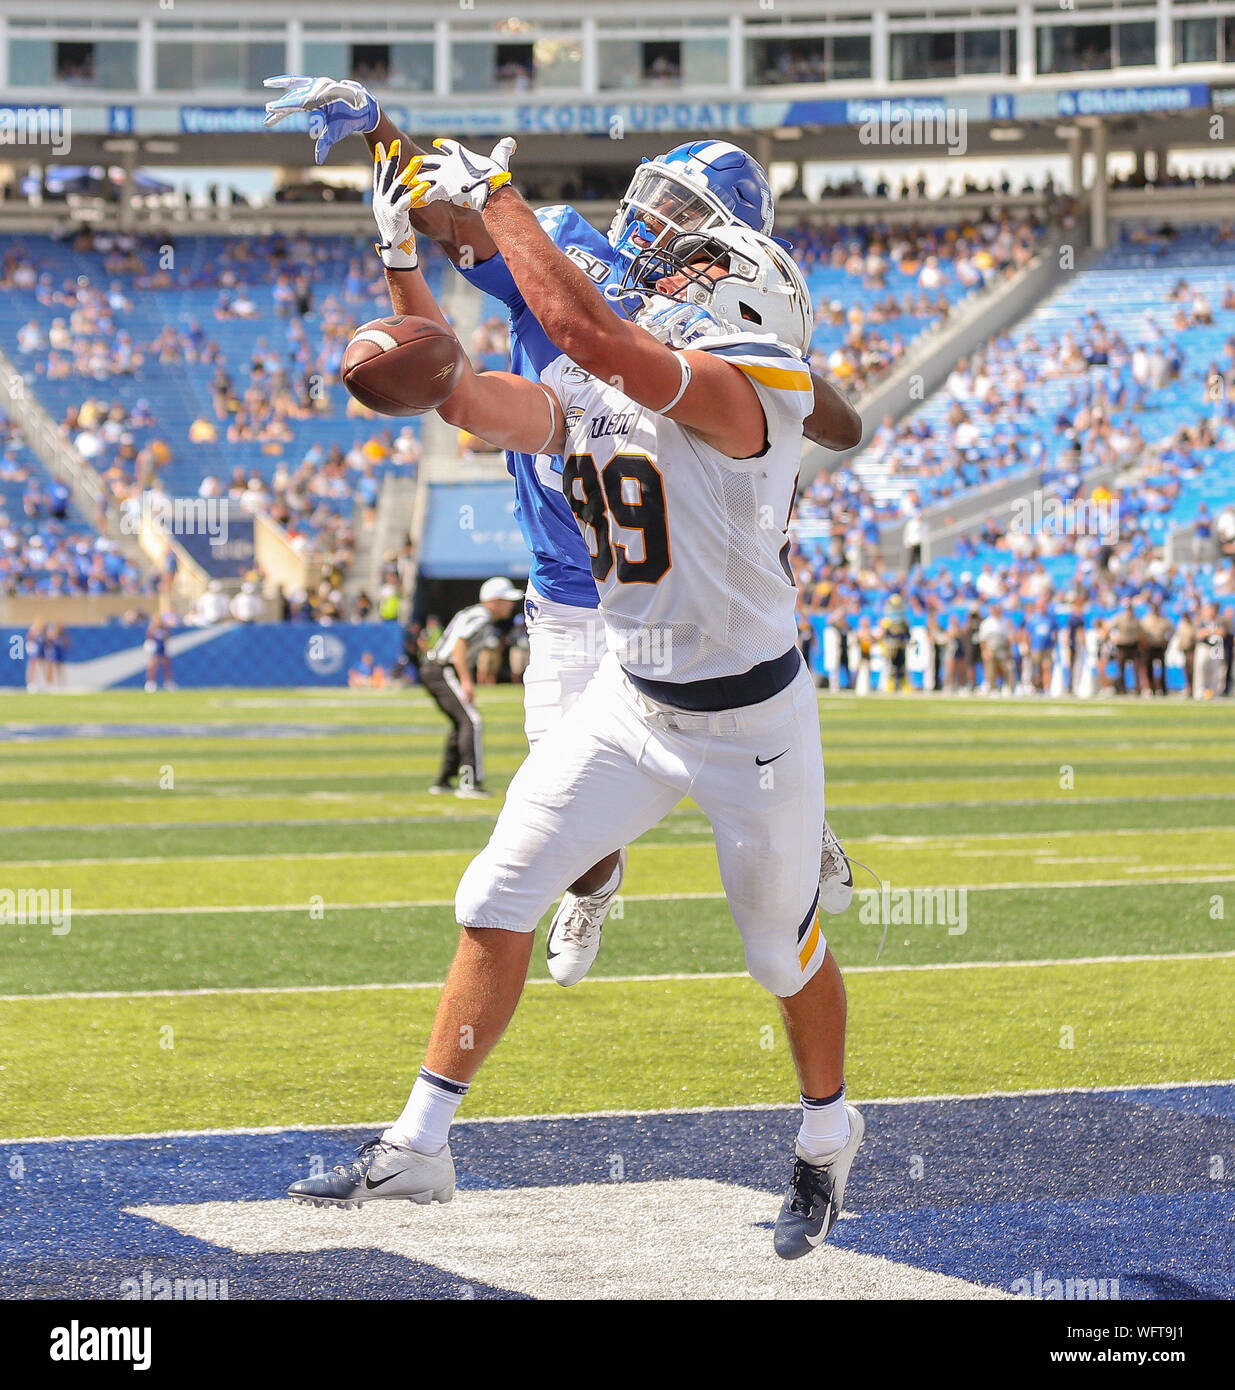 Kentucky, USA. 31st Aug, 2019. August 31, 2019: Kentucky's Jamari Brown #32 defends against Toledo TE Drew Rosi #99 during the NCAA football game between the Kentucky Wildcats and the Toledo Rockets at Kroger Field in Lexington, KY. Credit: Cal Sport Media/Alamy Live News Stock Photo